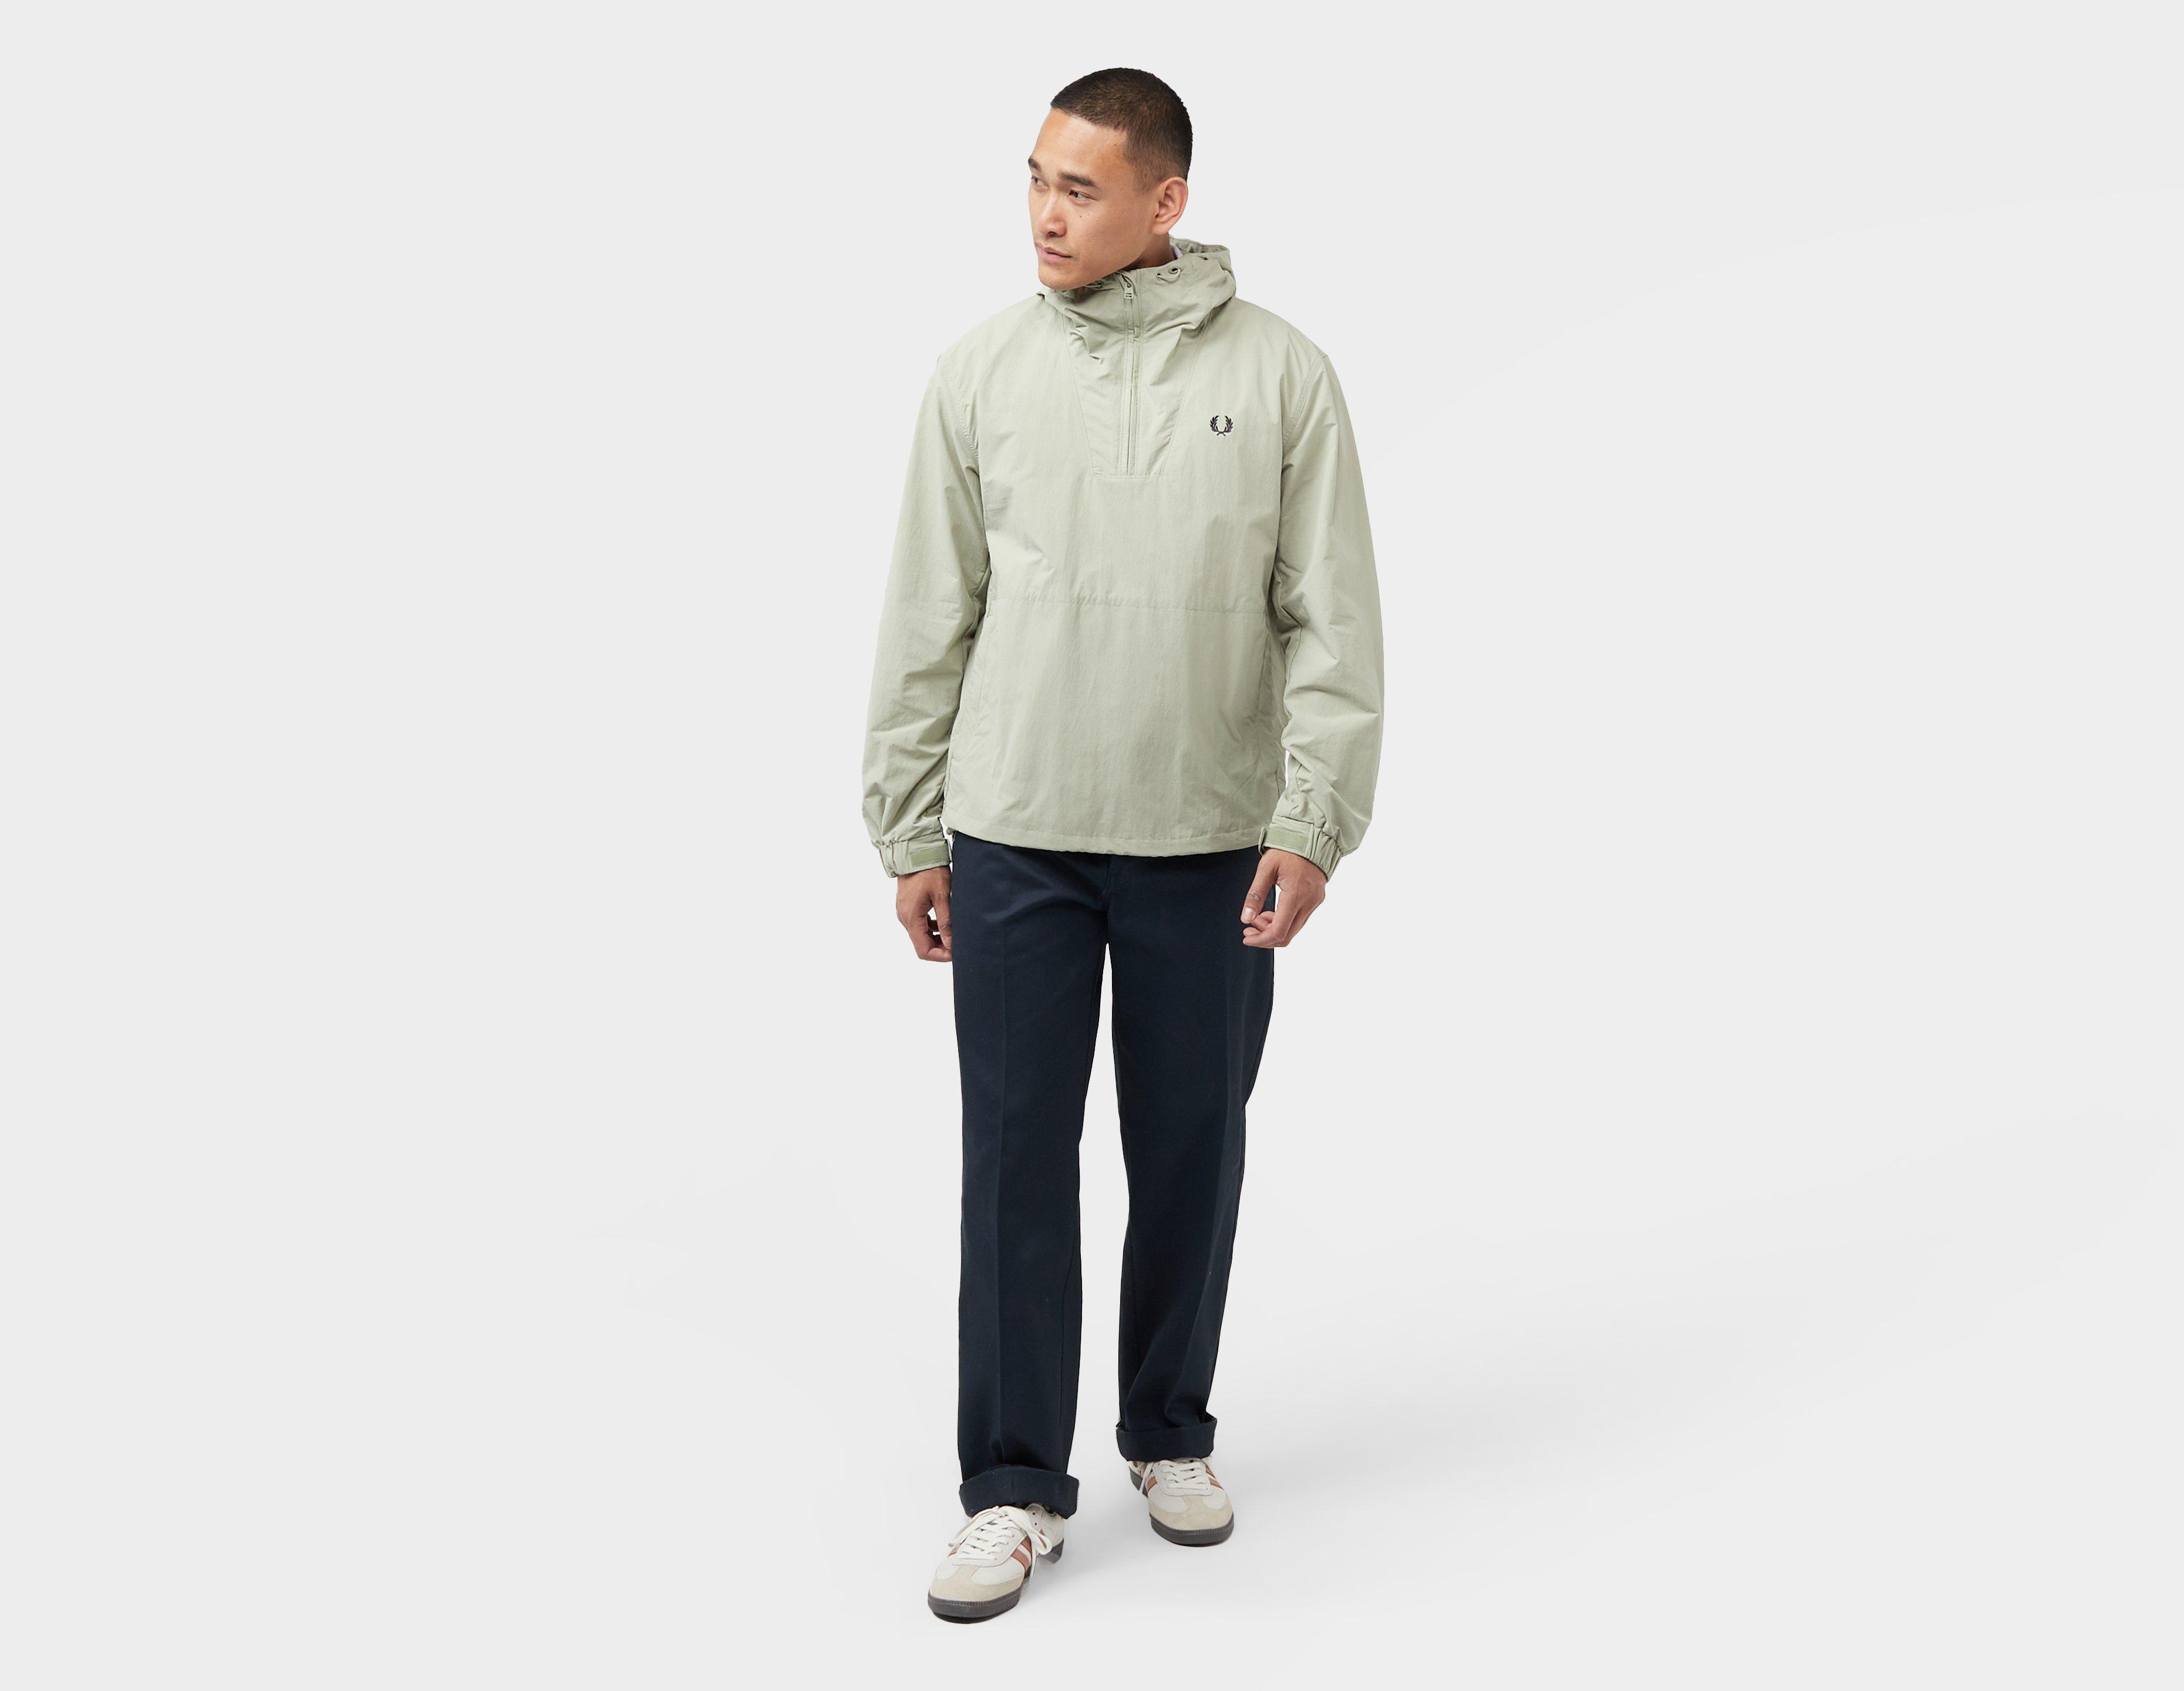 M Therma Range Jacket | Green Fred Perry Overhead Shell Jacket 